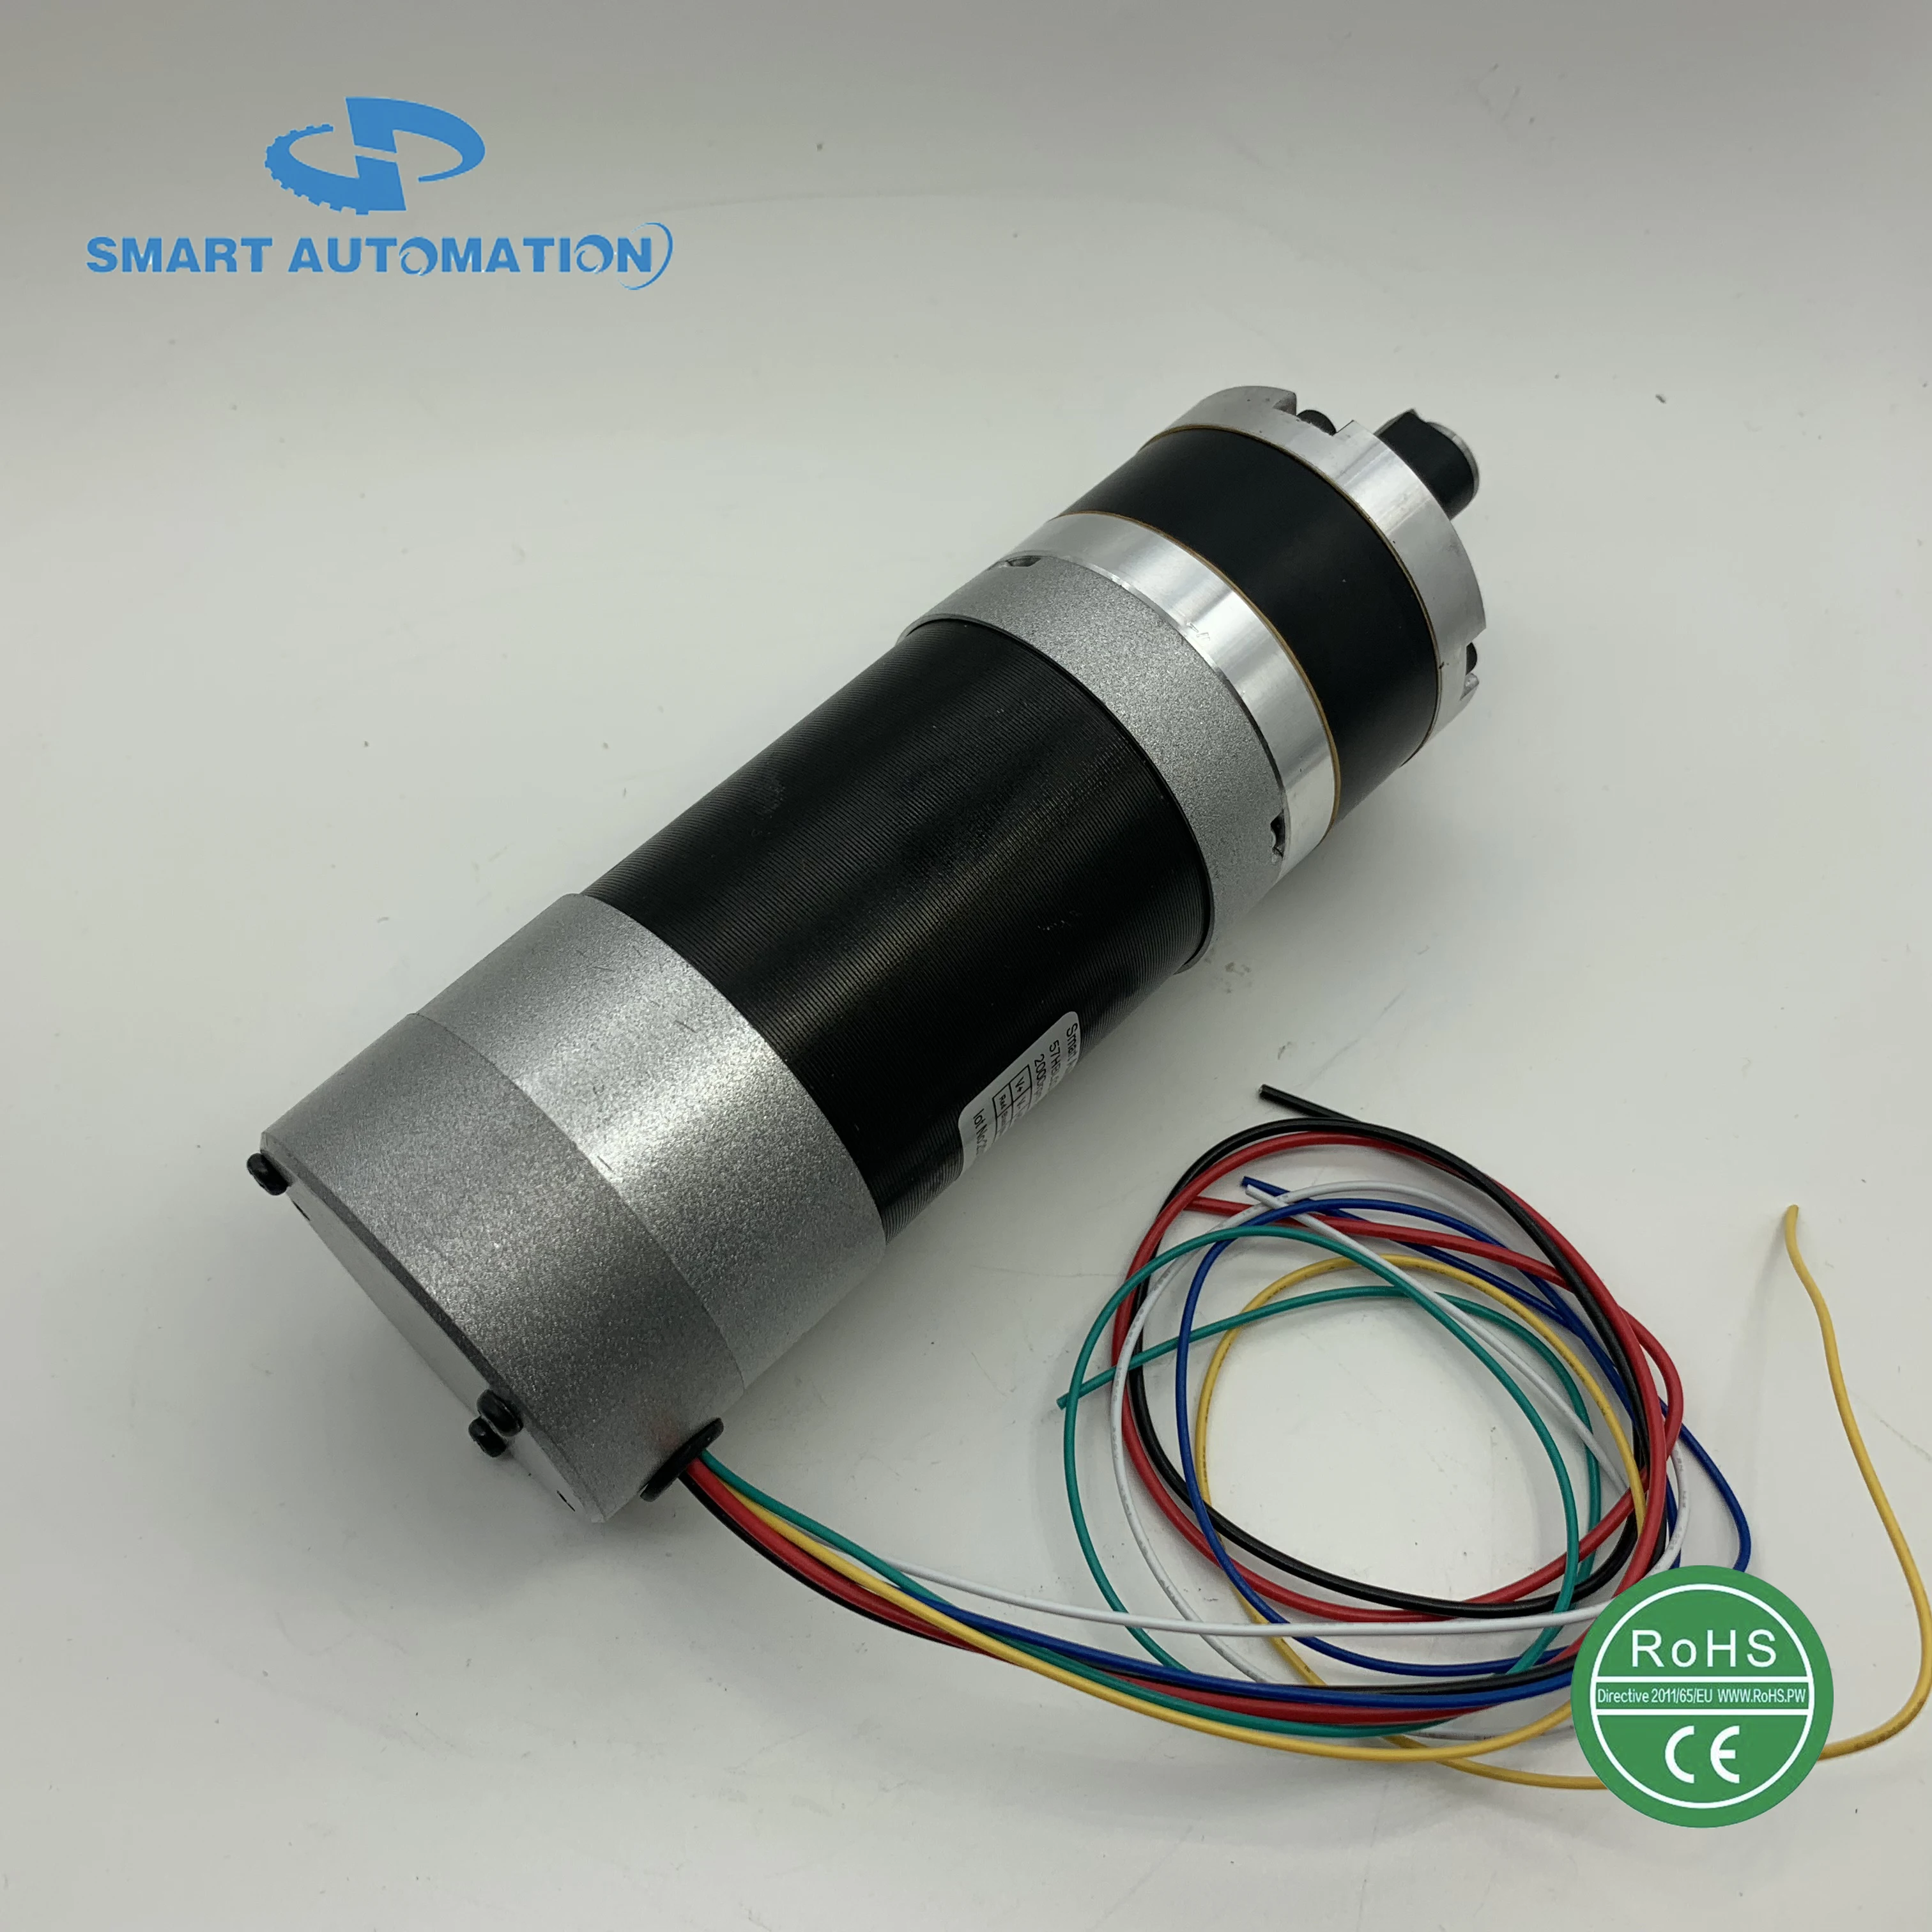 56JXE.57BL Low Cost High Torque Planetary Gear Reducer BLDC Motors Dc Brushless 3Nm 5Nm 10Nm 20Nm upto 45Nm